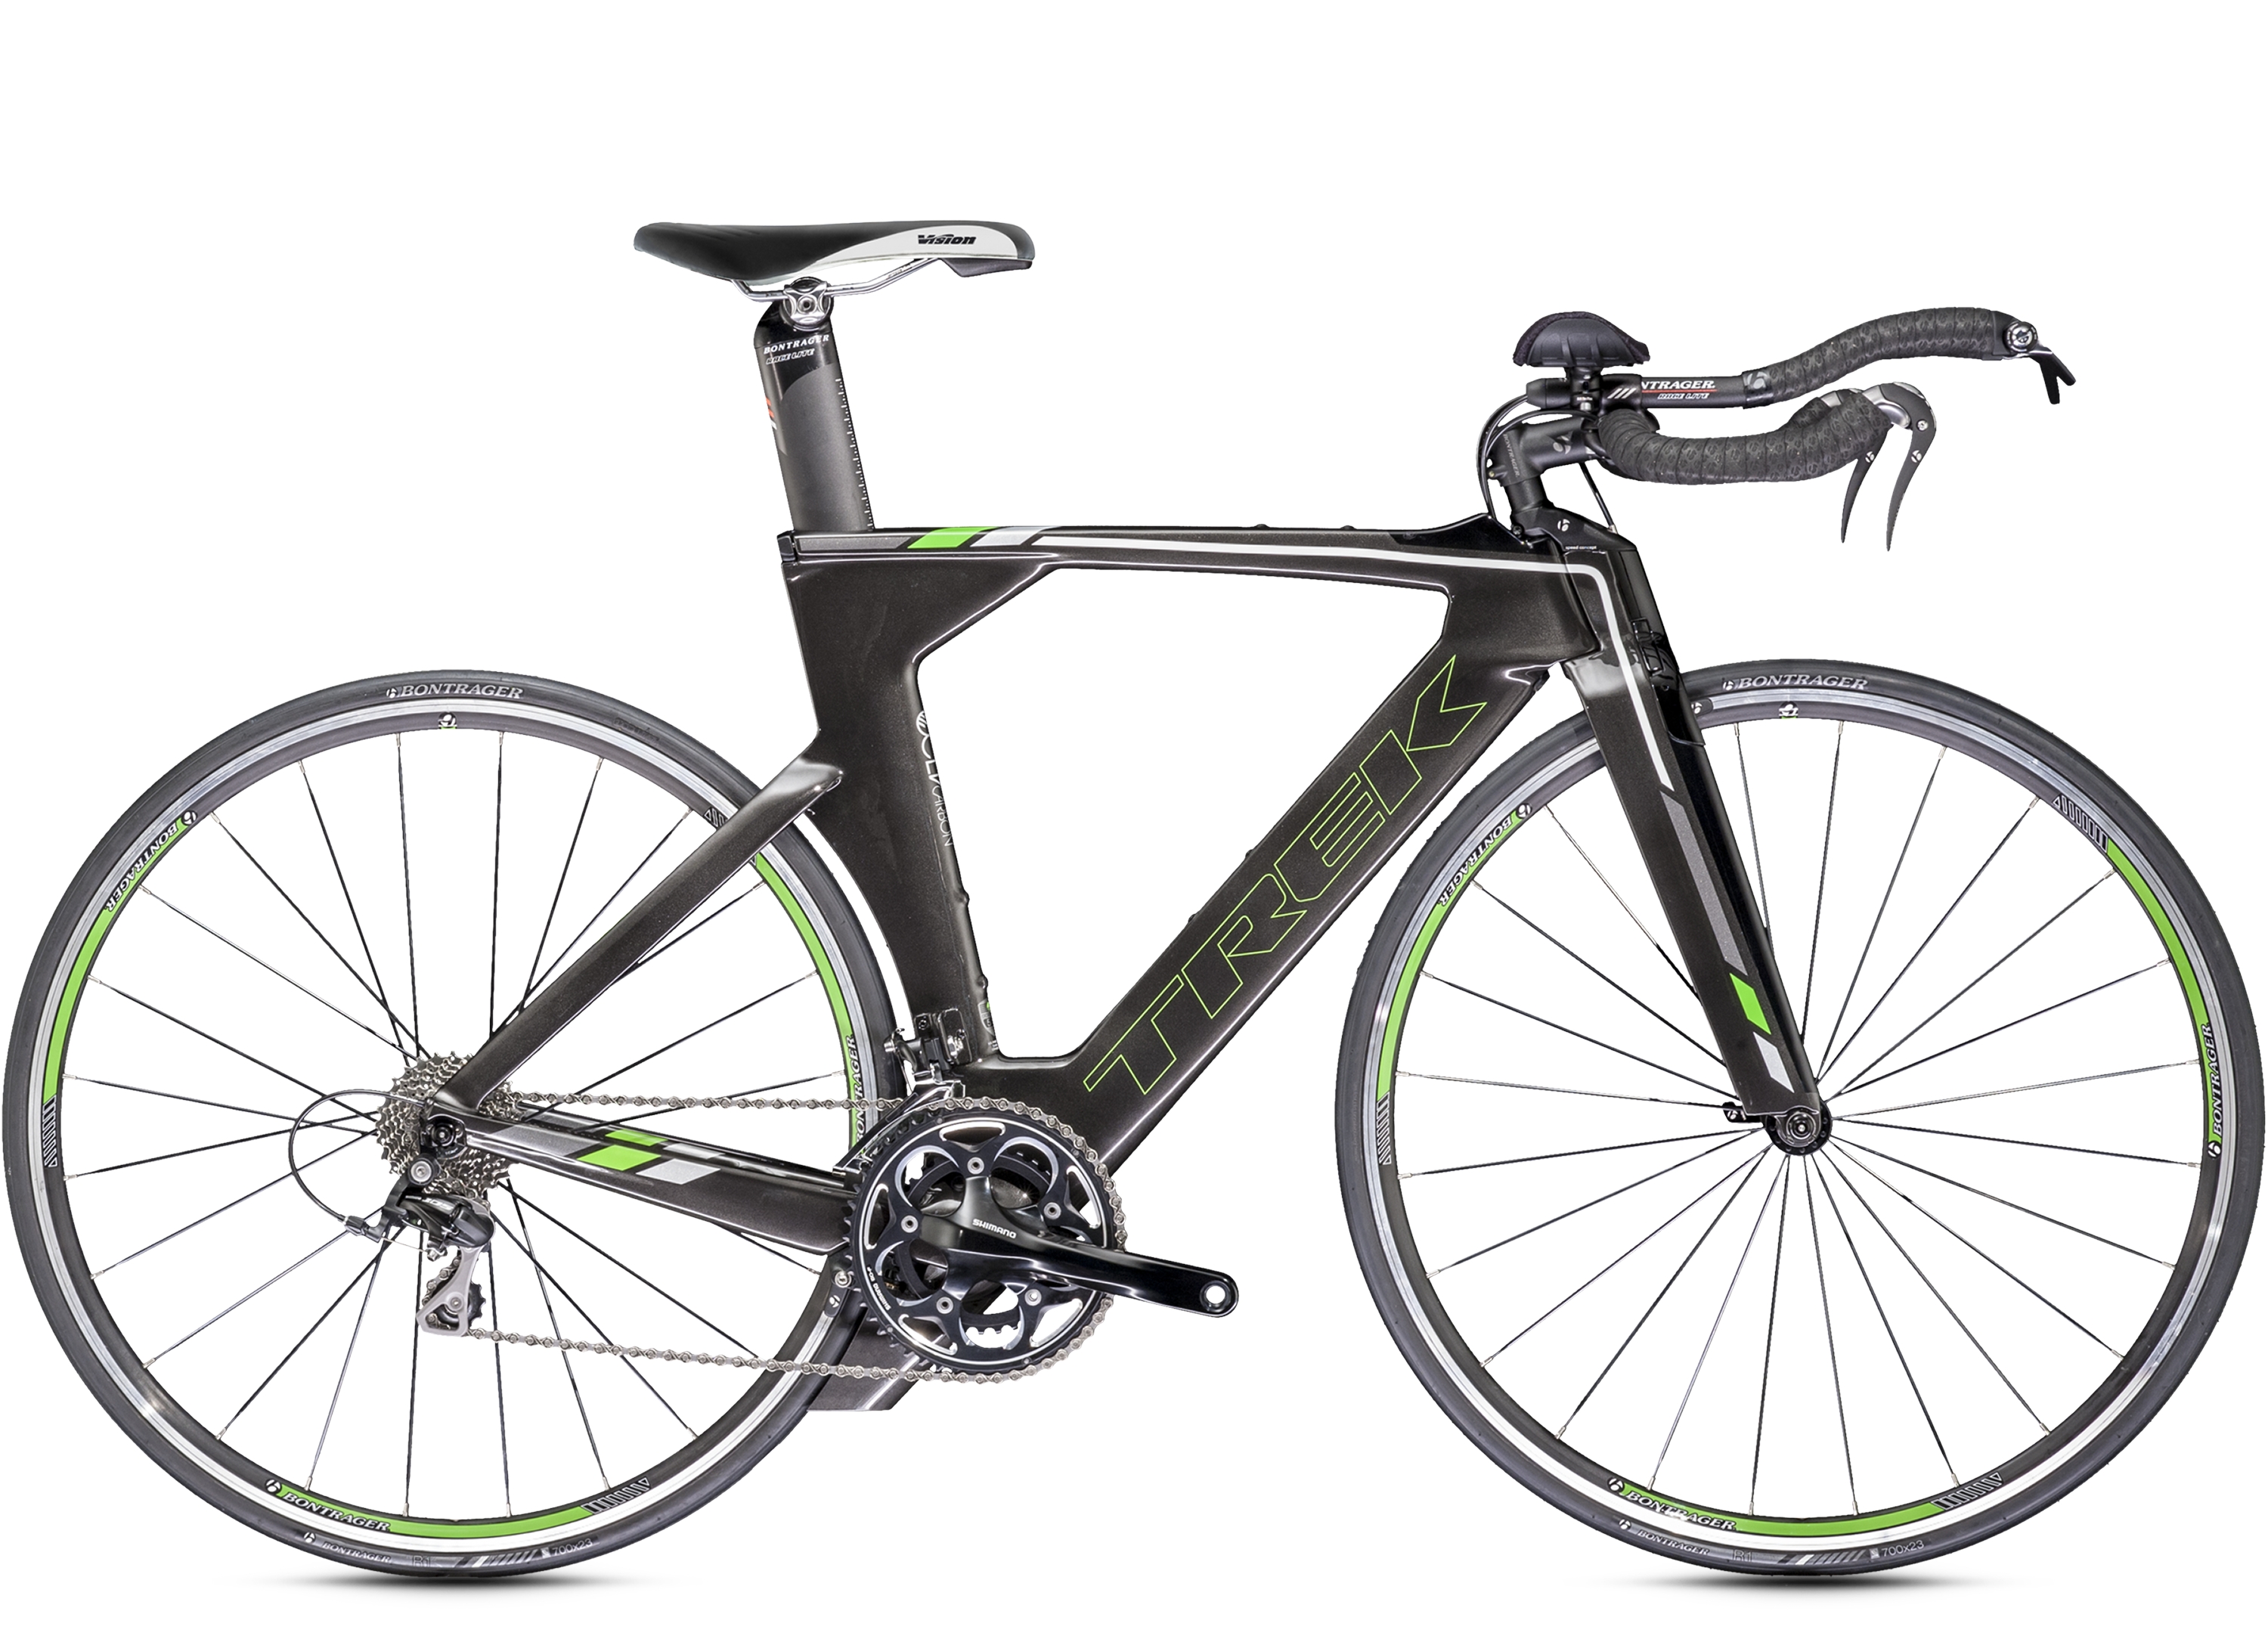 2014 Speed Concept 7.0 - Bike Archive 